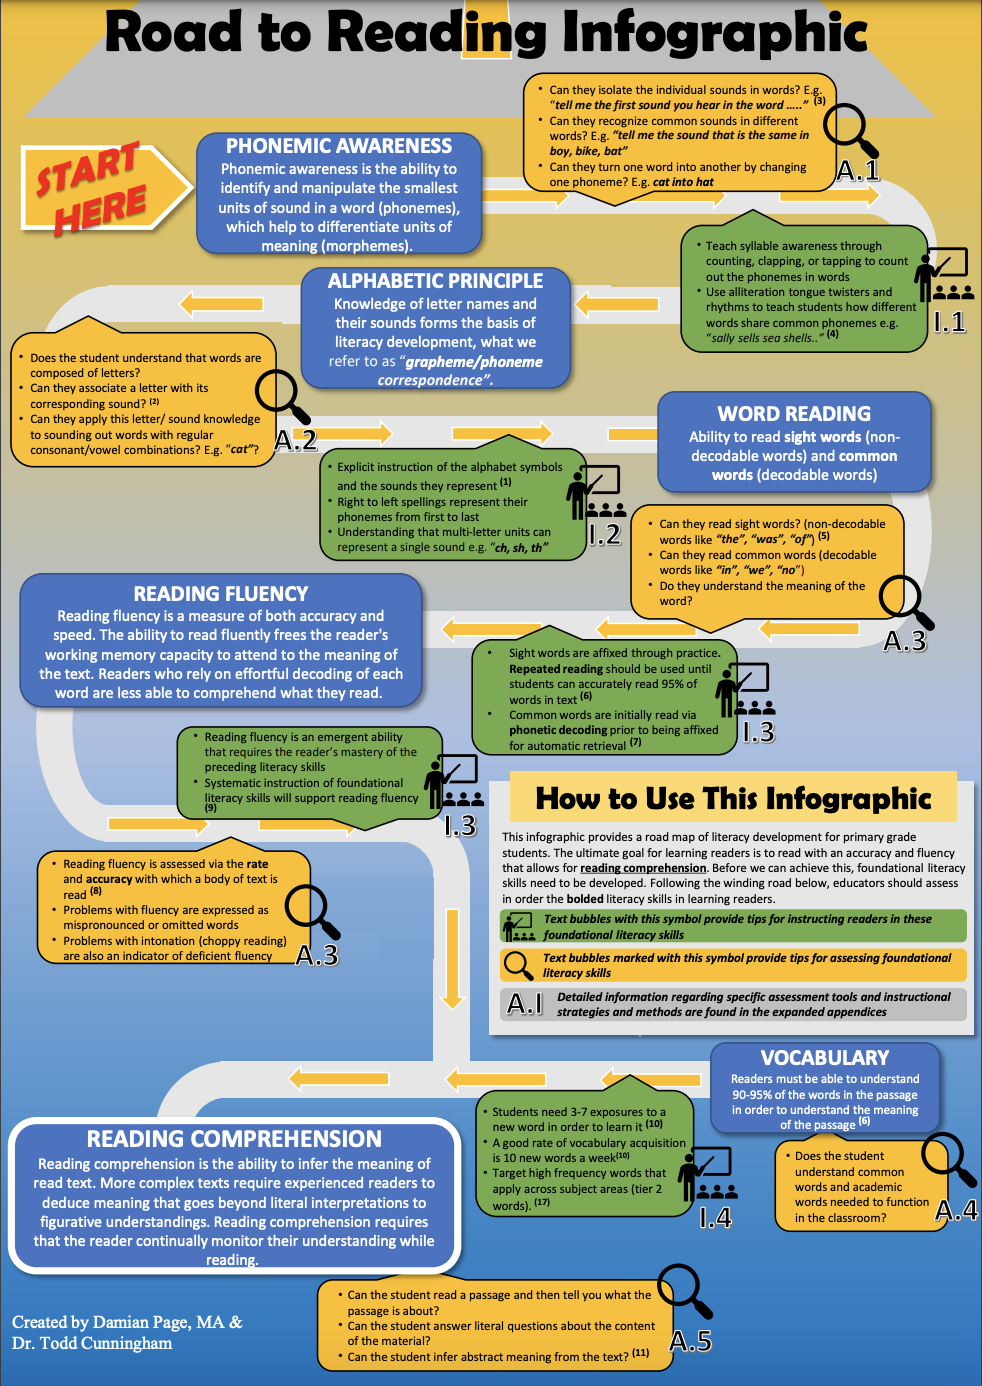 Using the “Road to Reading Infographic” to Guide Assessment of and Intervention for Foundational Literacy Skills